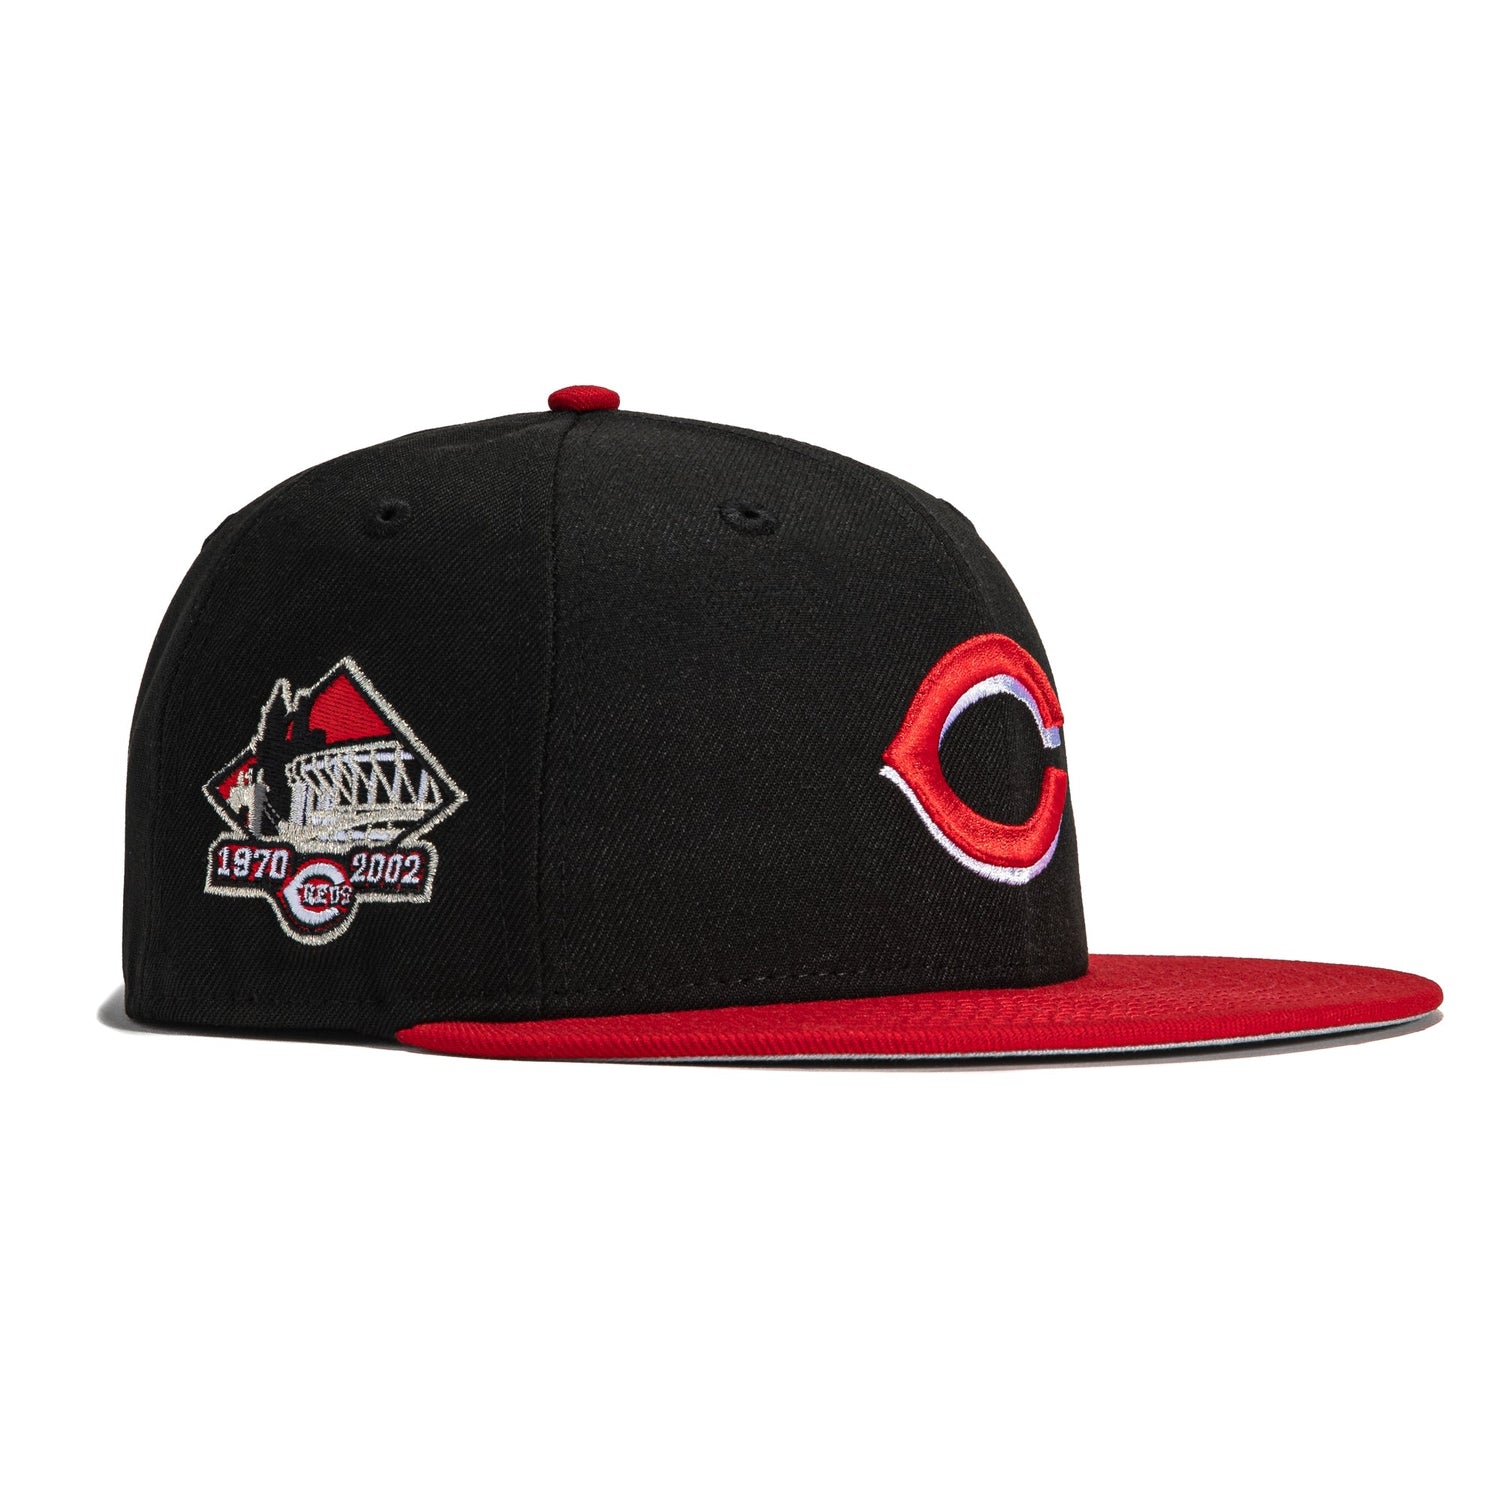 New Era 59FIFTY Cincinnati Reds Alternate 2 Authentic Collection on Field Fitted Hat Green